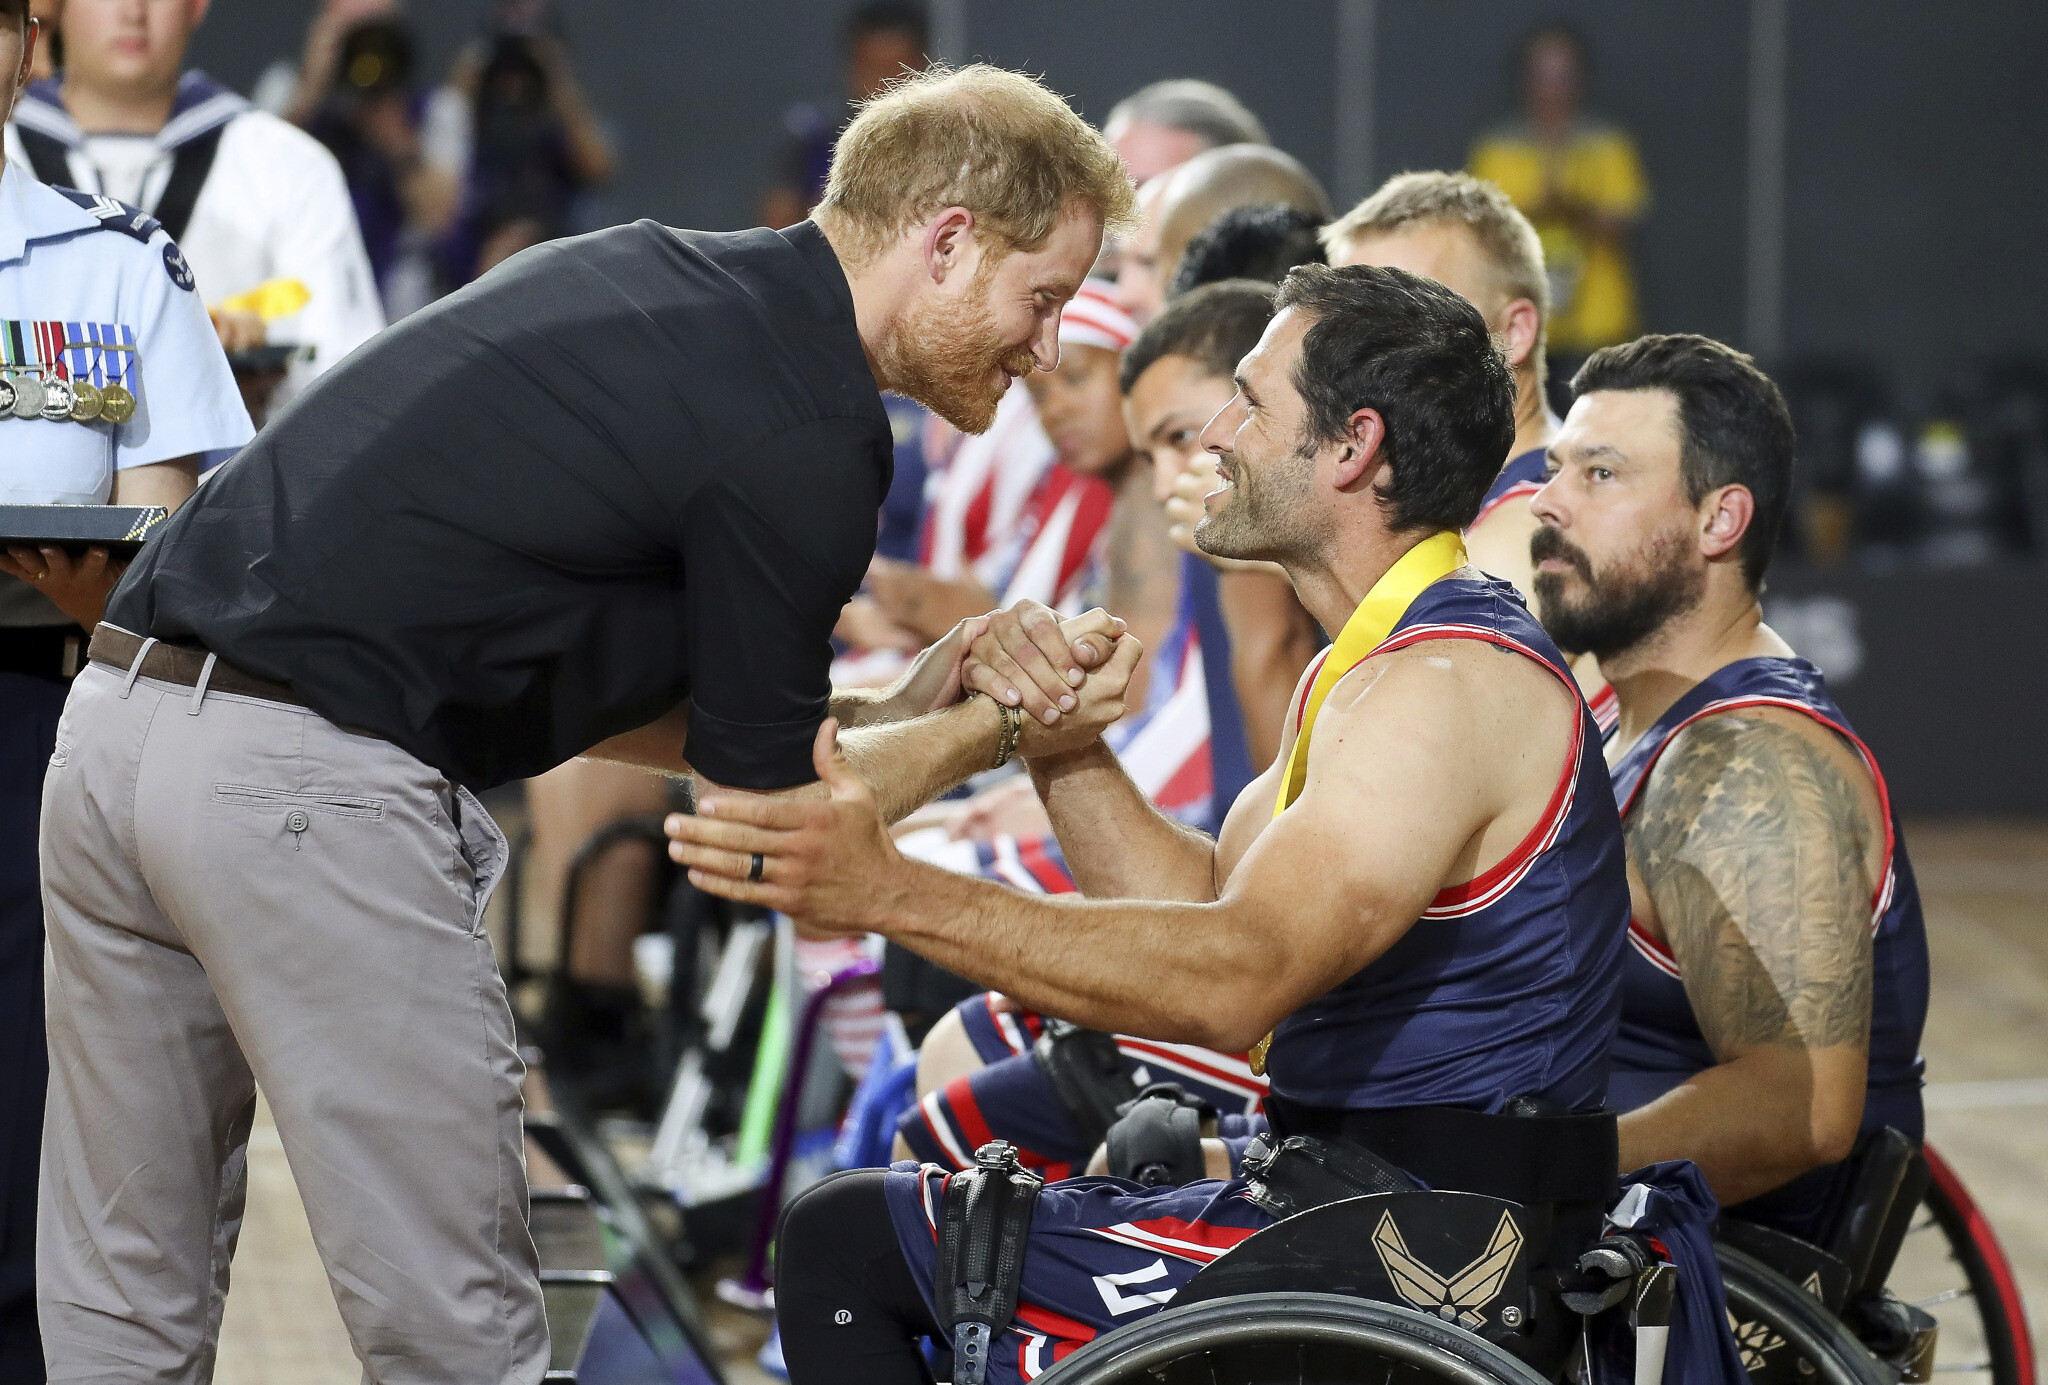 Israeli war wounded said set to participate in Prince Harry's Invictus Games  | The Times of Israel